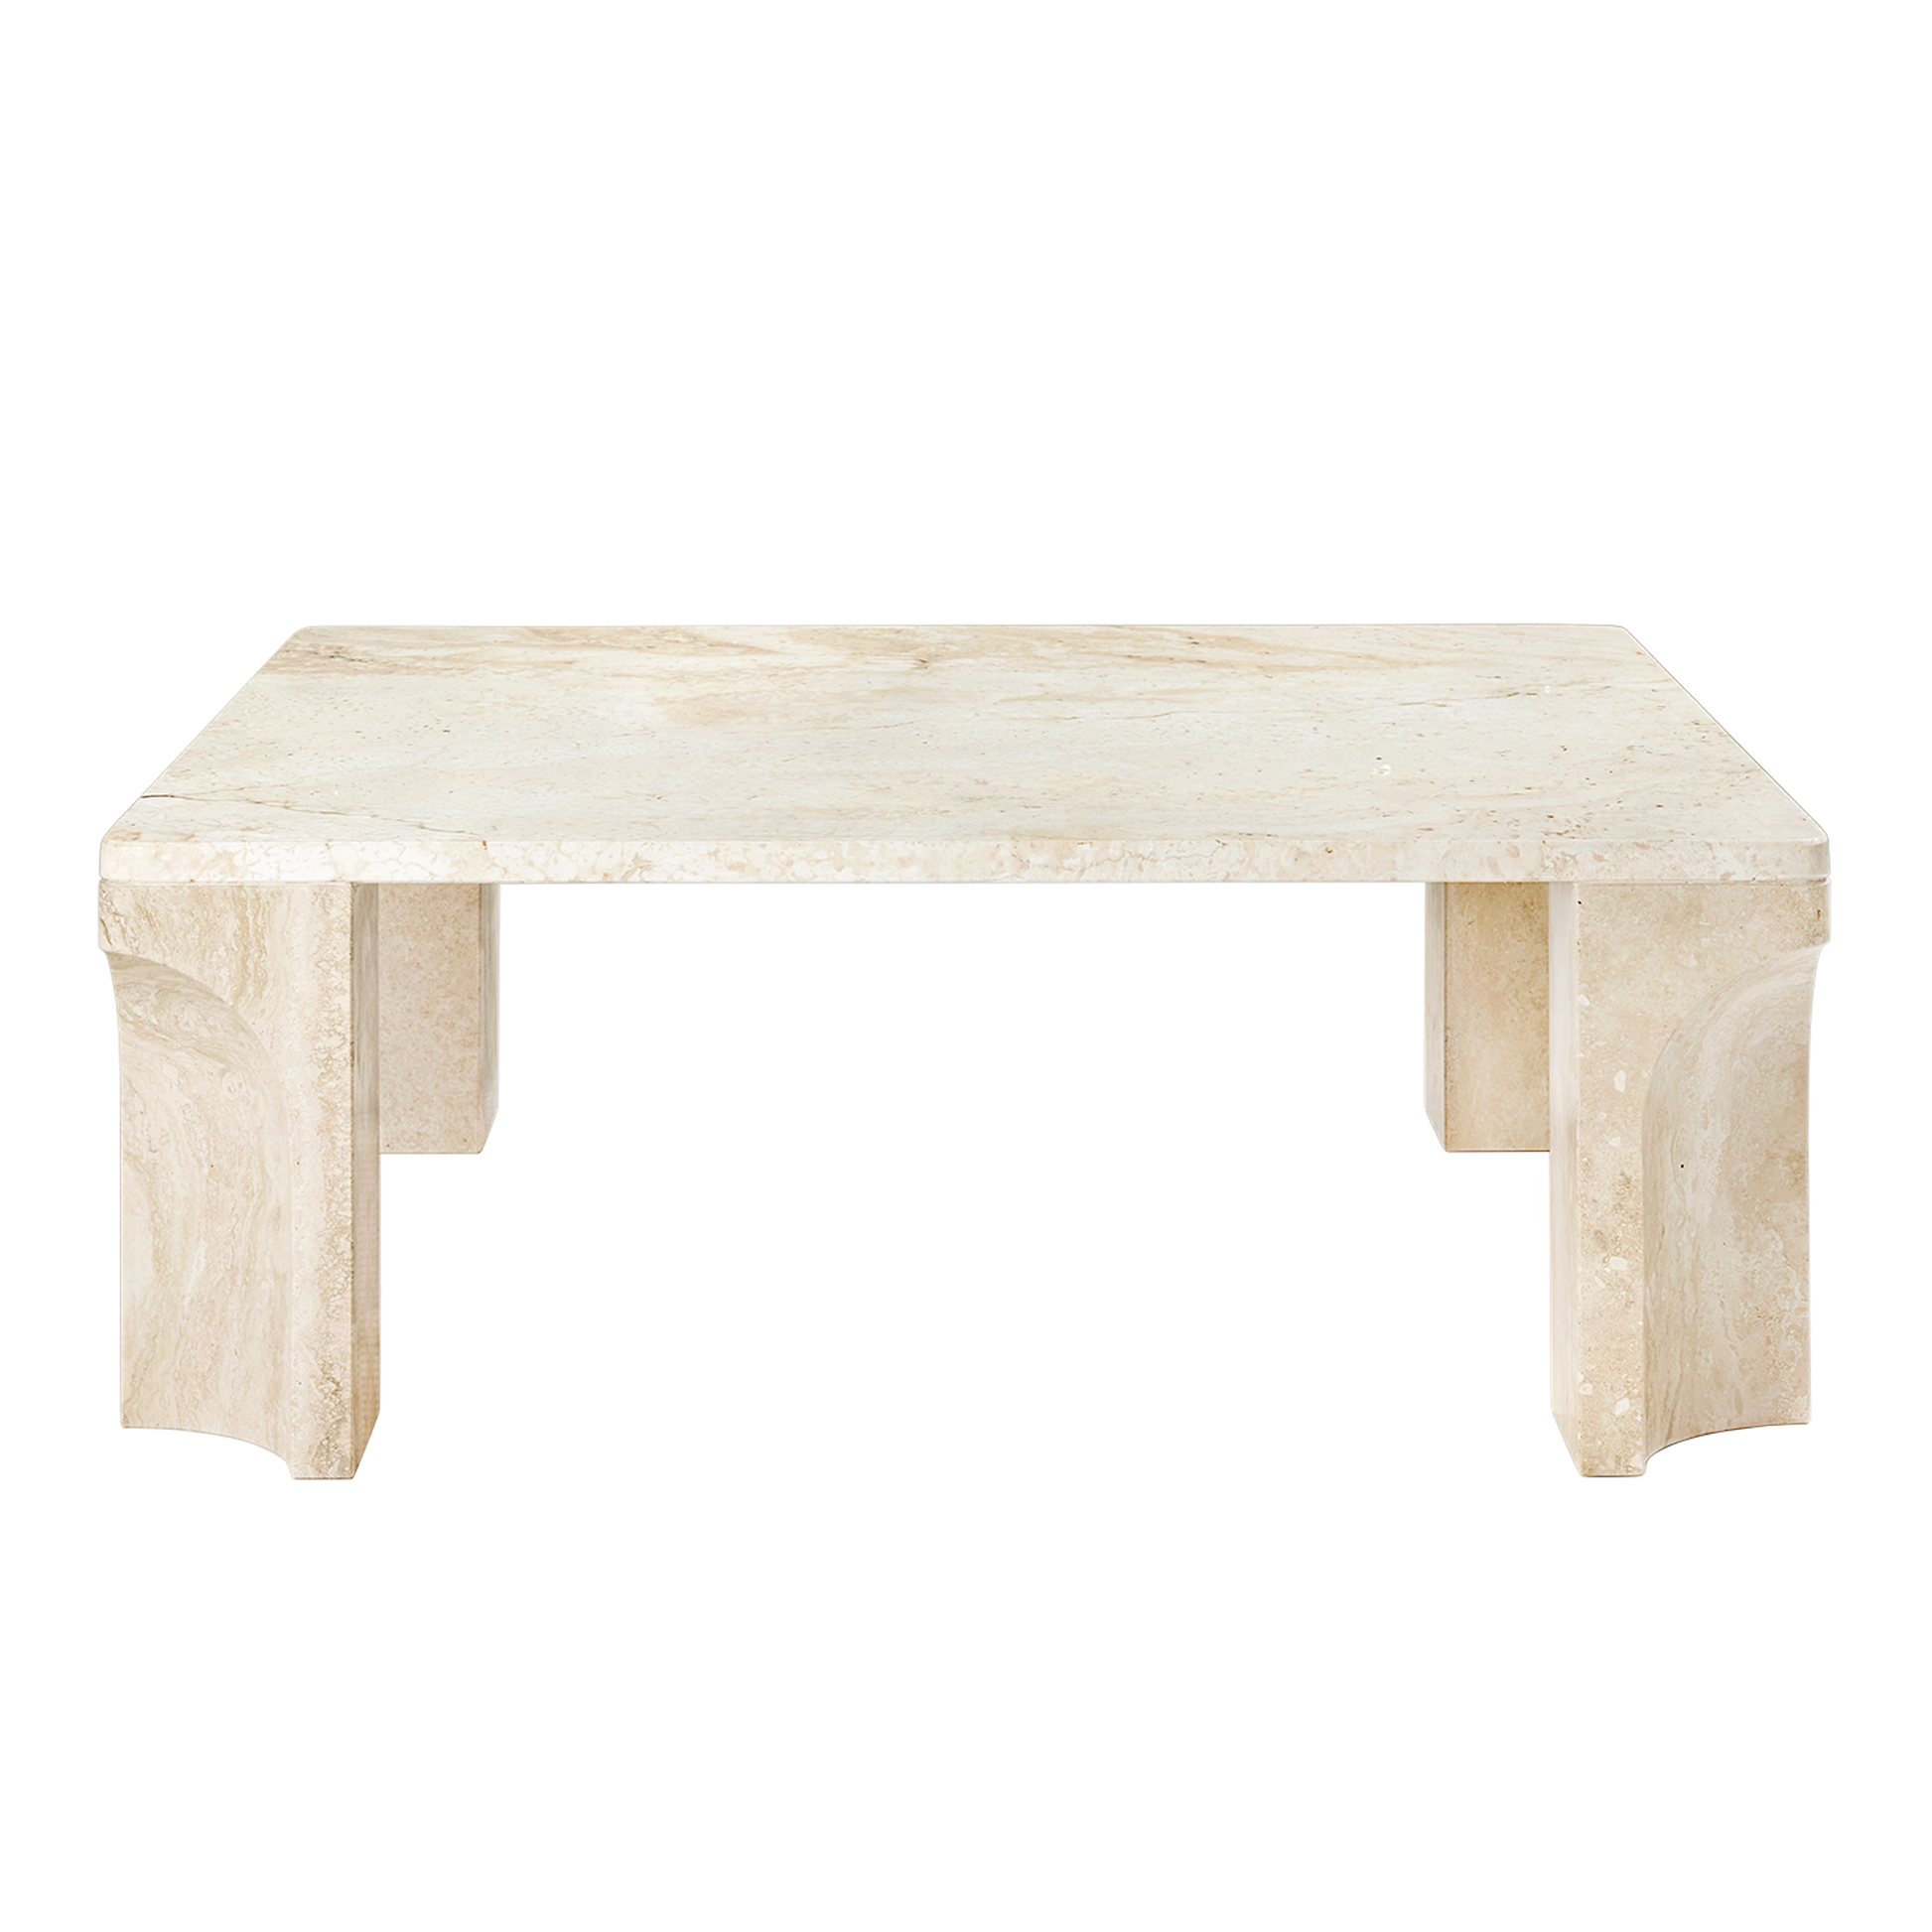 Doric Coffee Table Square 80 x 80 cm by GUBI #Neutral White